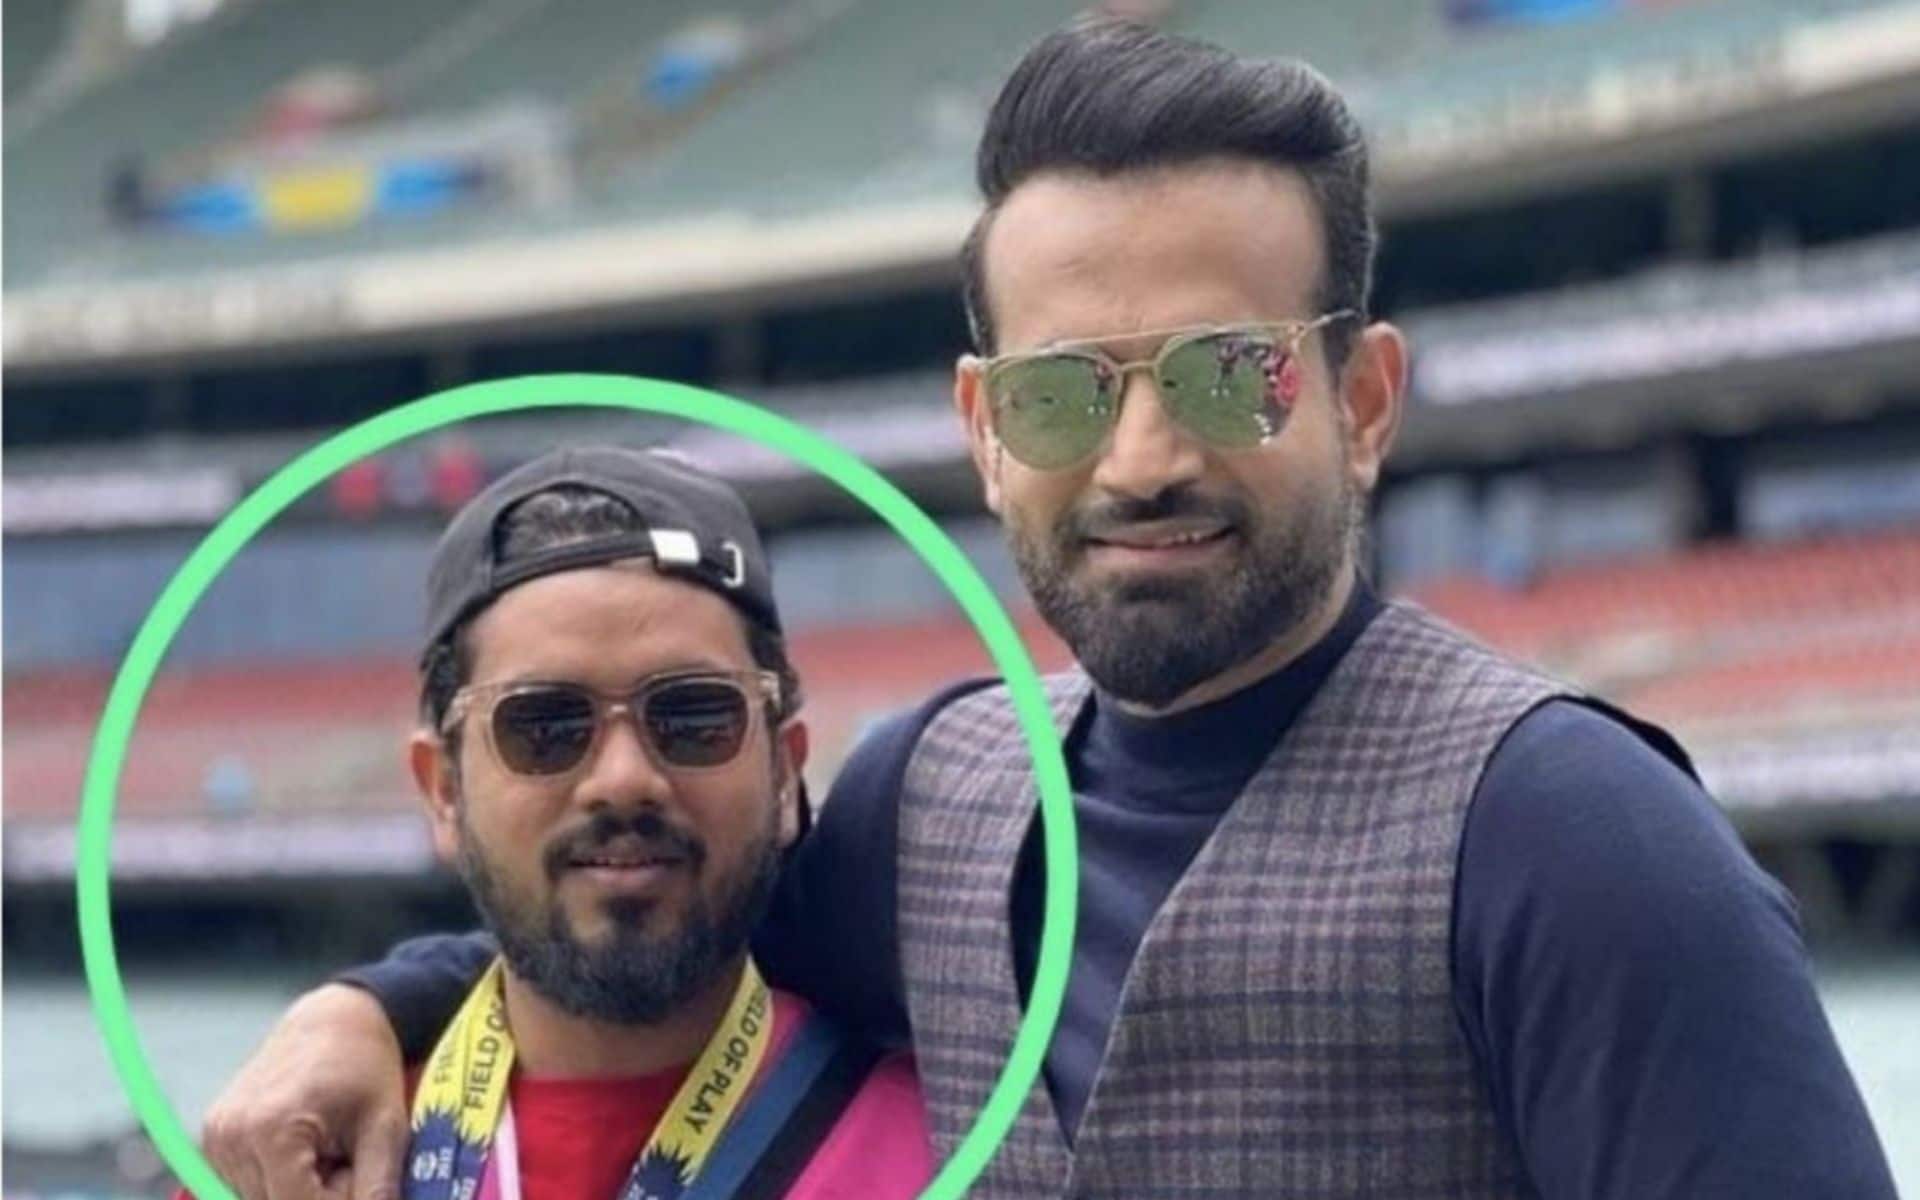 Fayaz Ansari accompanied Irfan Pathan to the West Indies for the T20 World Cup (x.com)